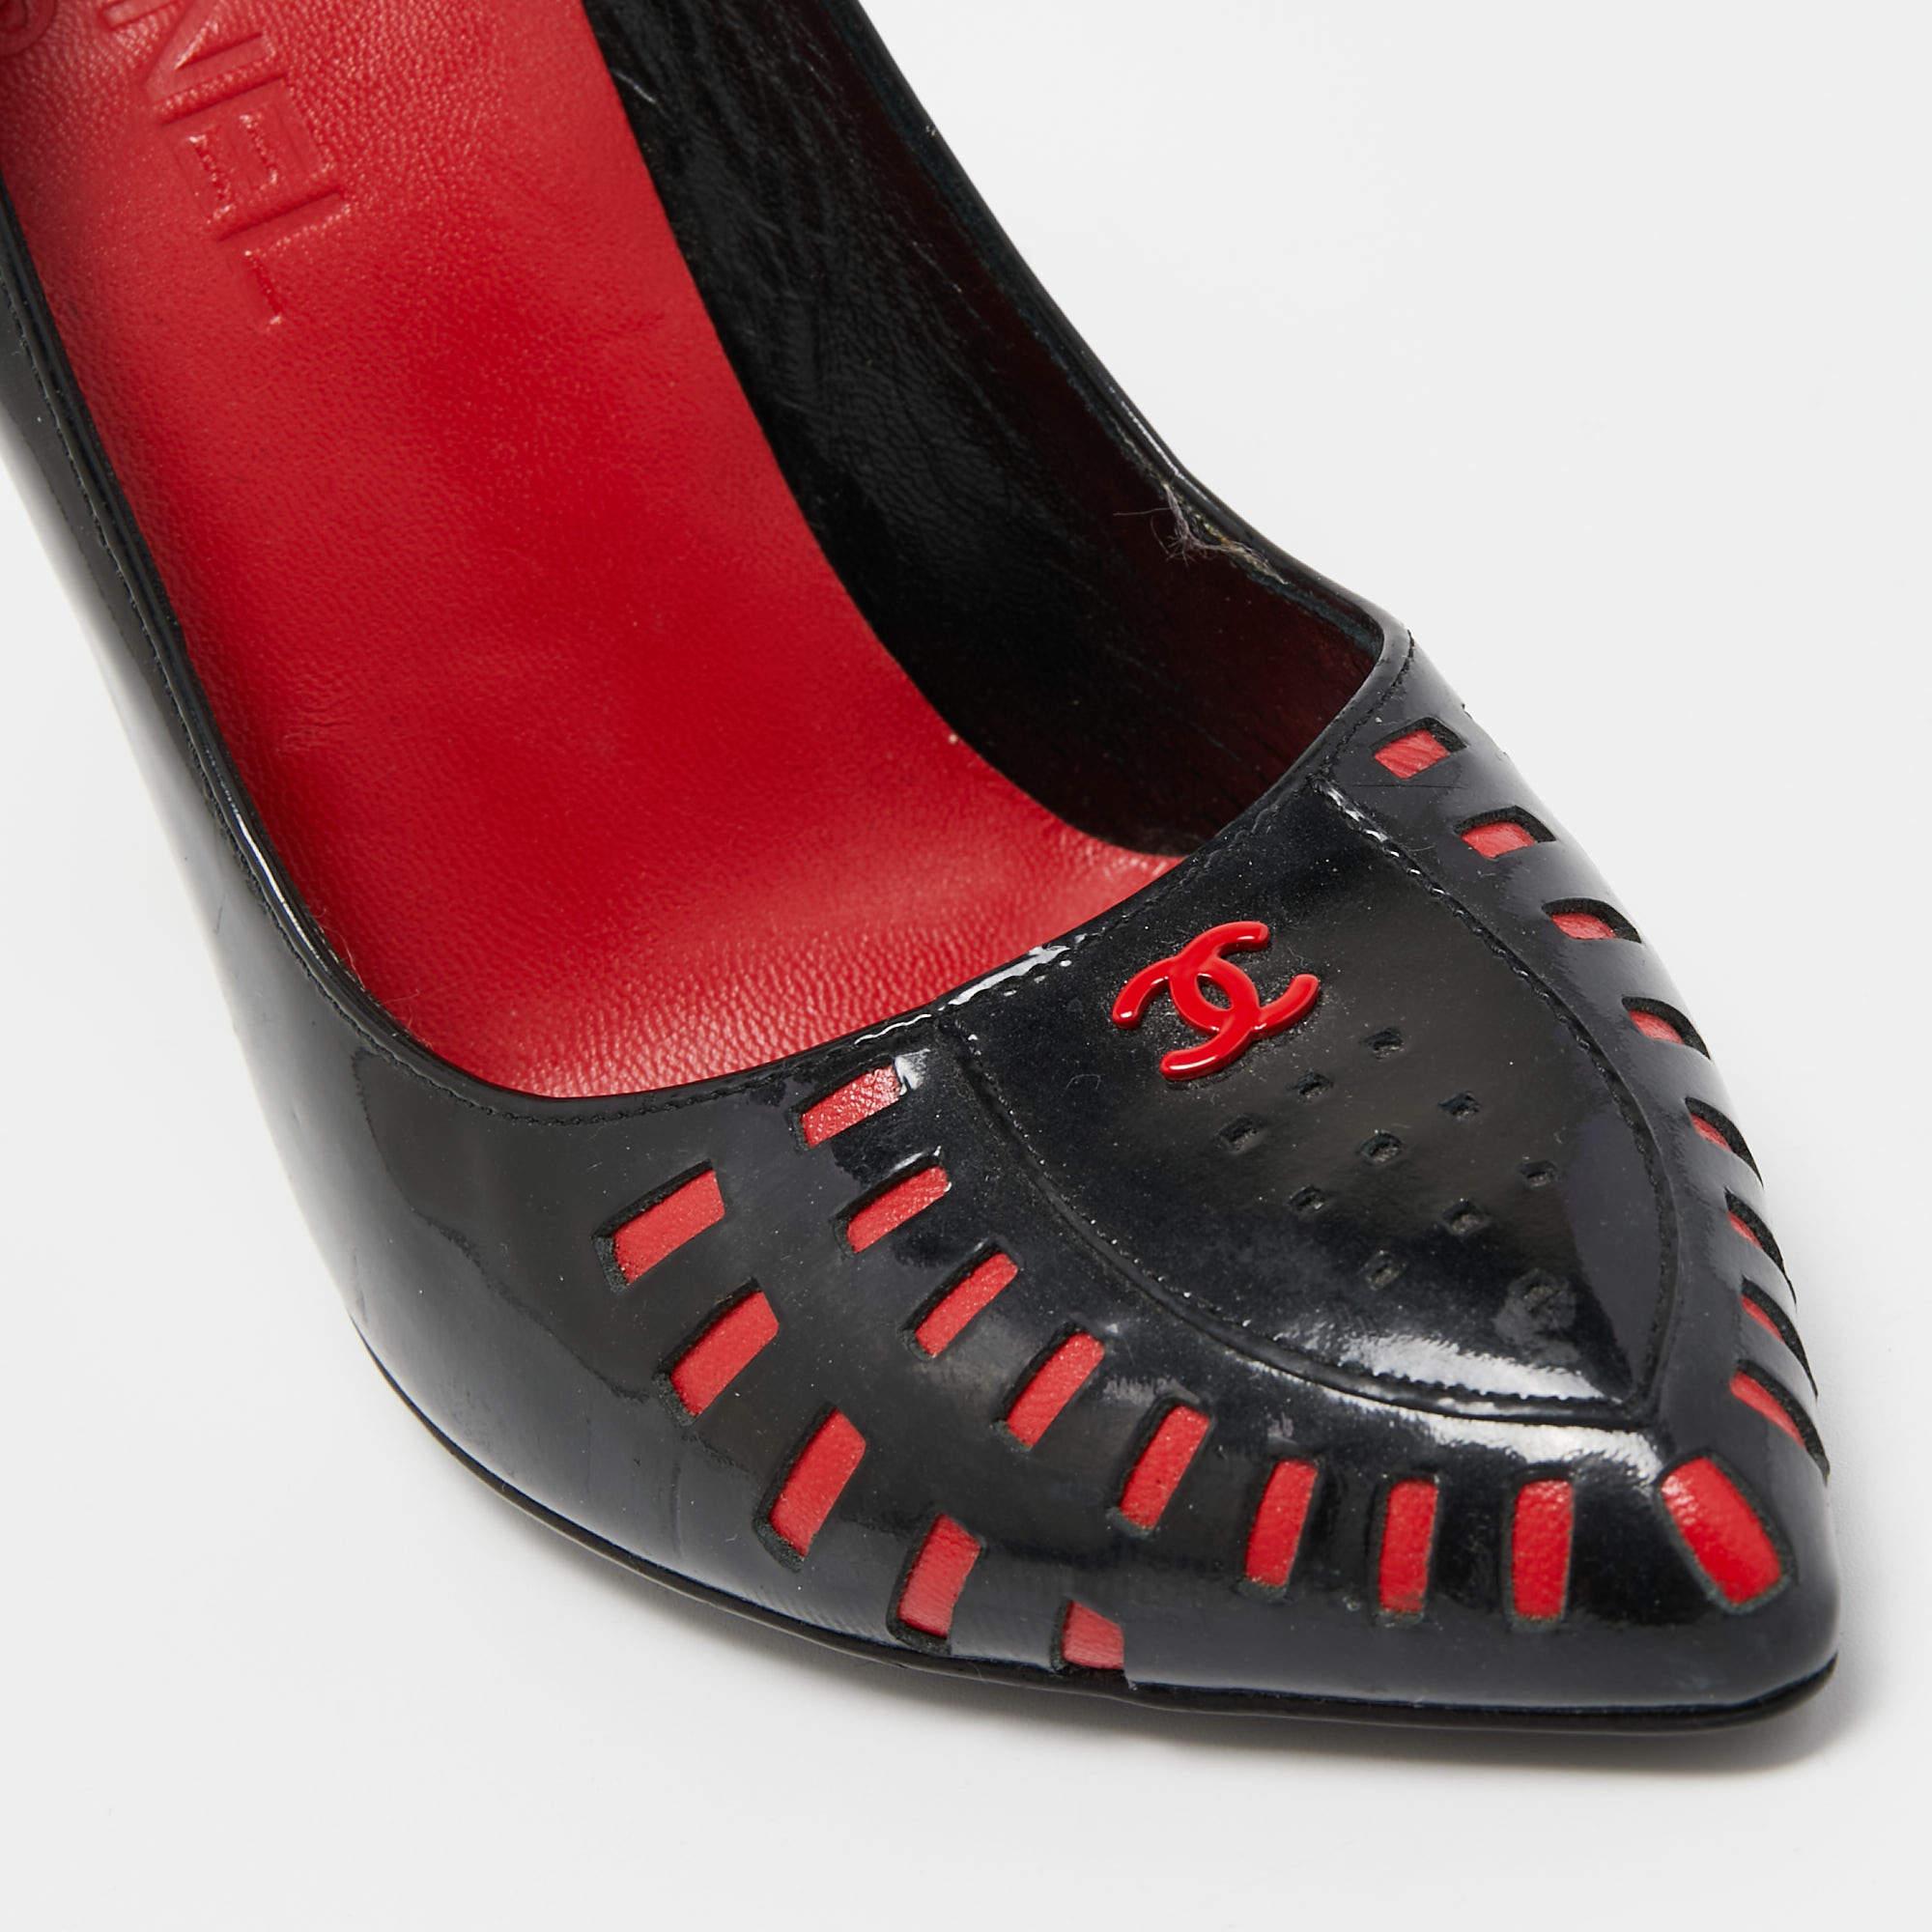 Chanel Black/Red Patent Pointed Toe Pumps Size 38 For Sale 3